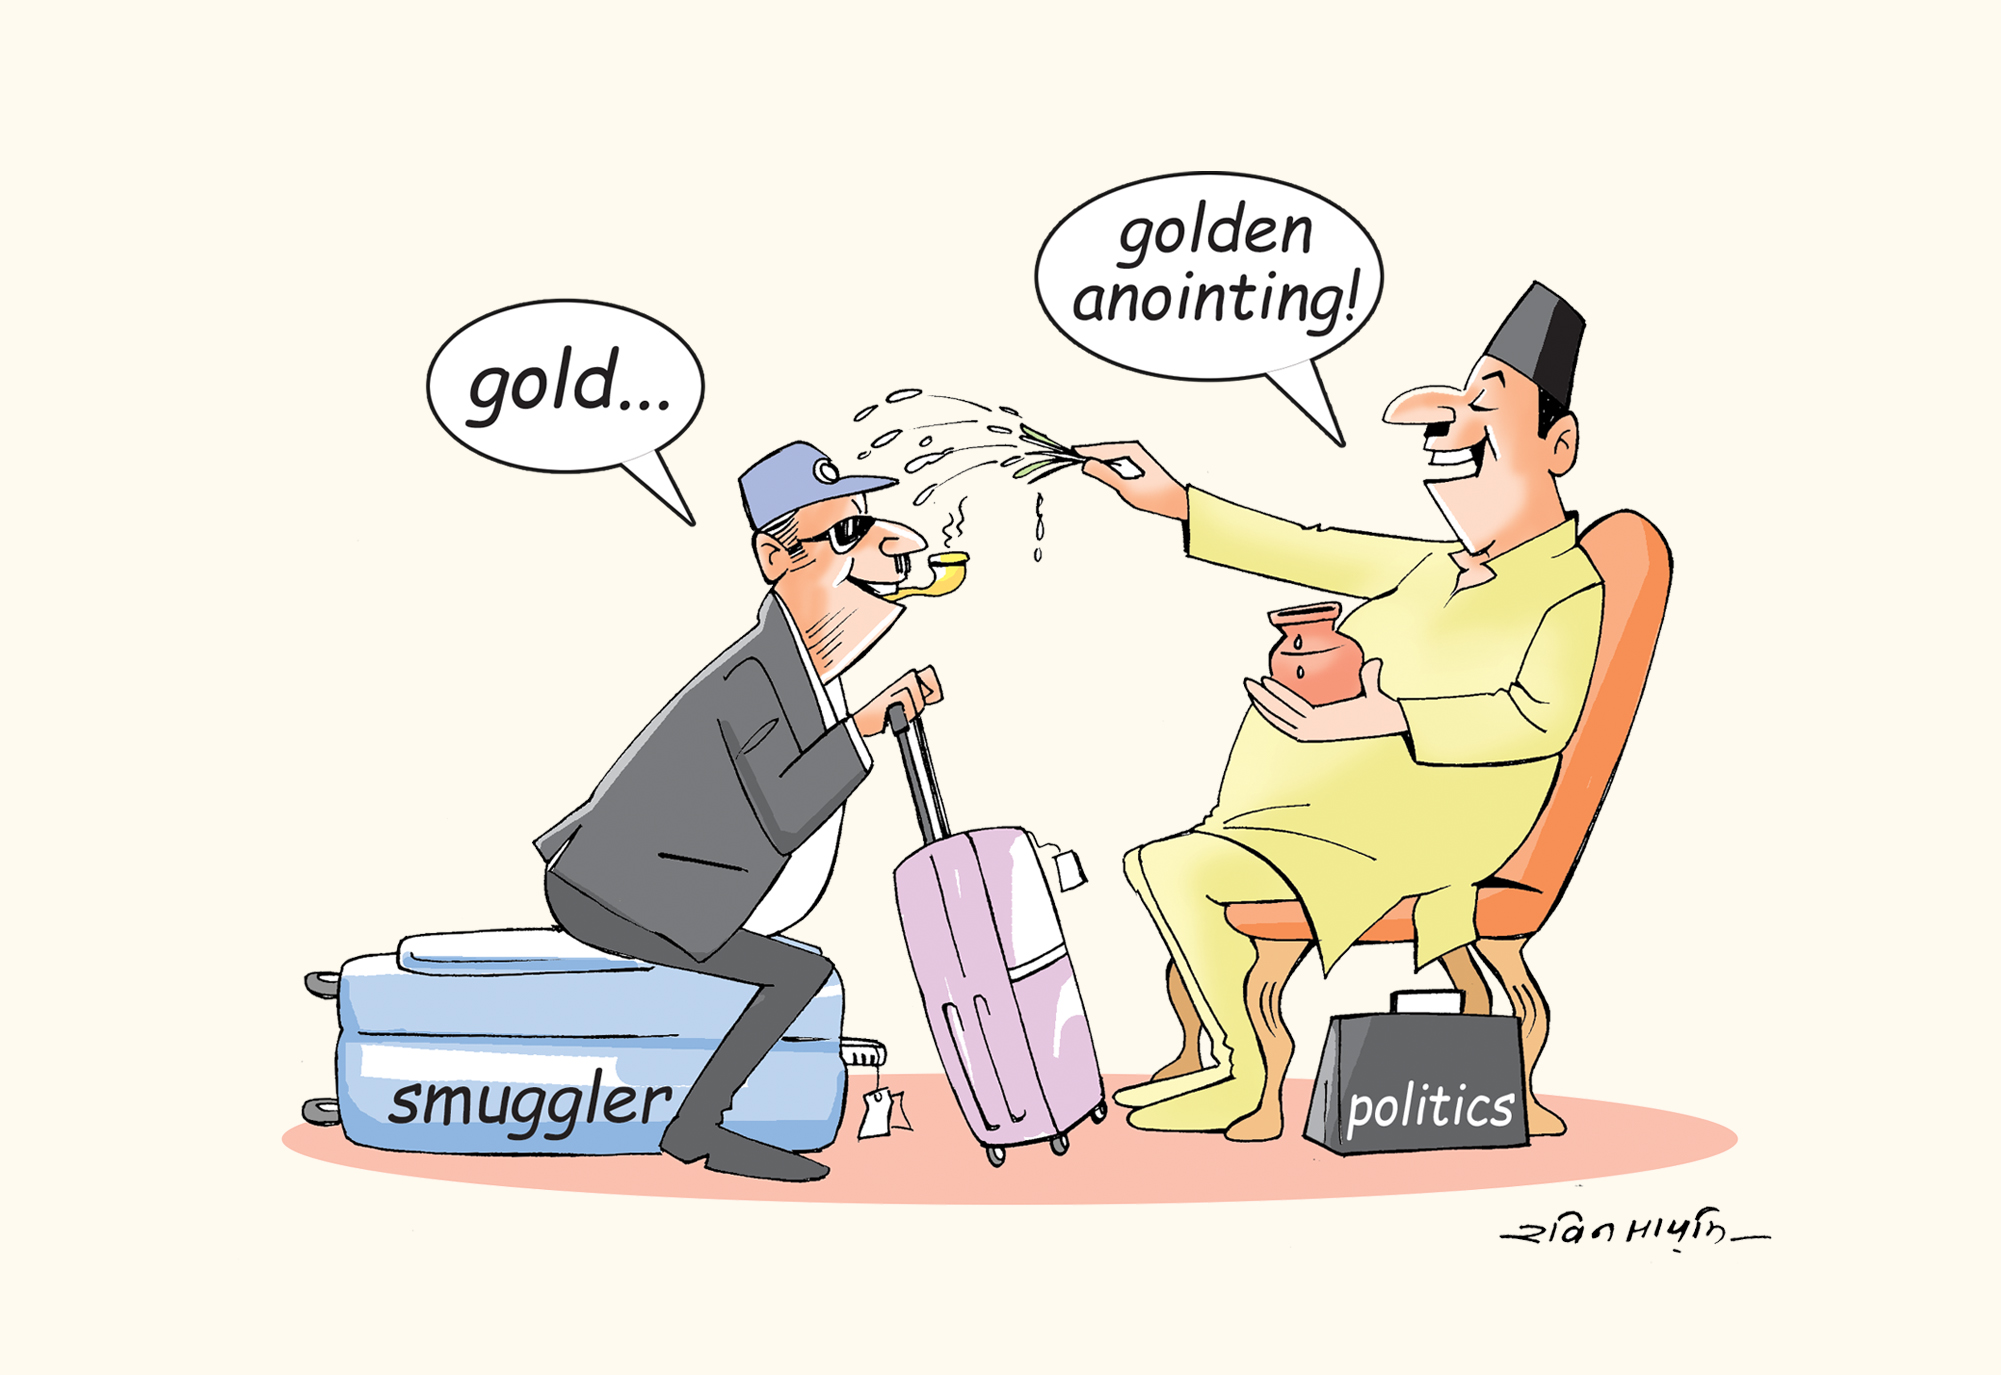 Investigation reports point to strong nexus between gold and currency smugglers